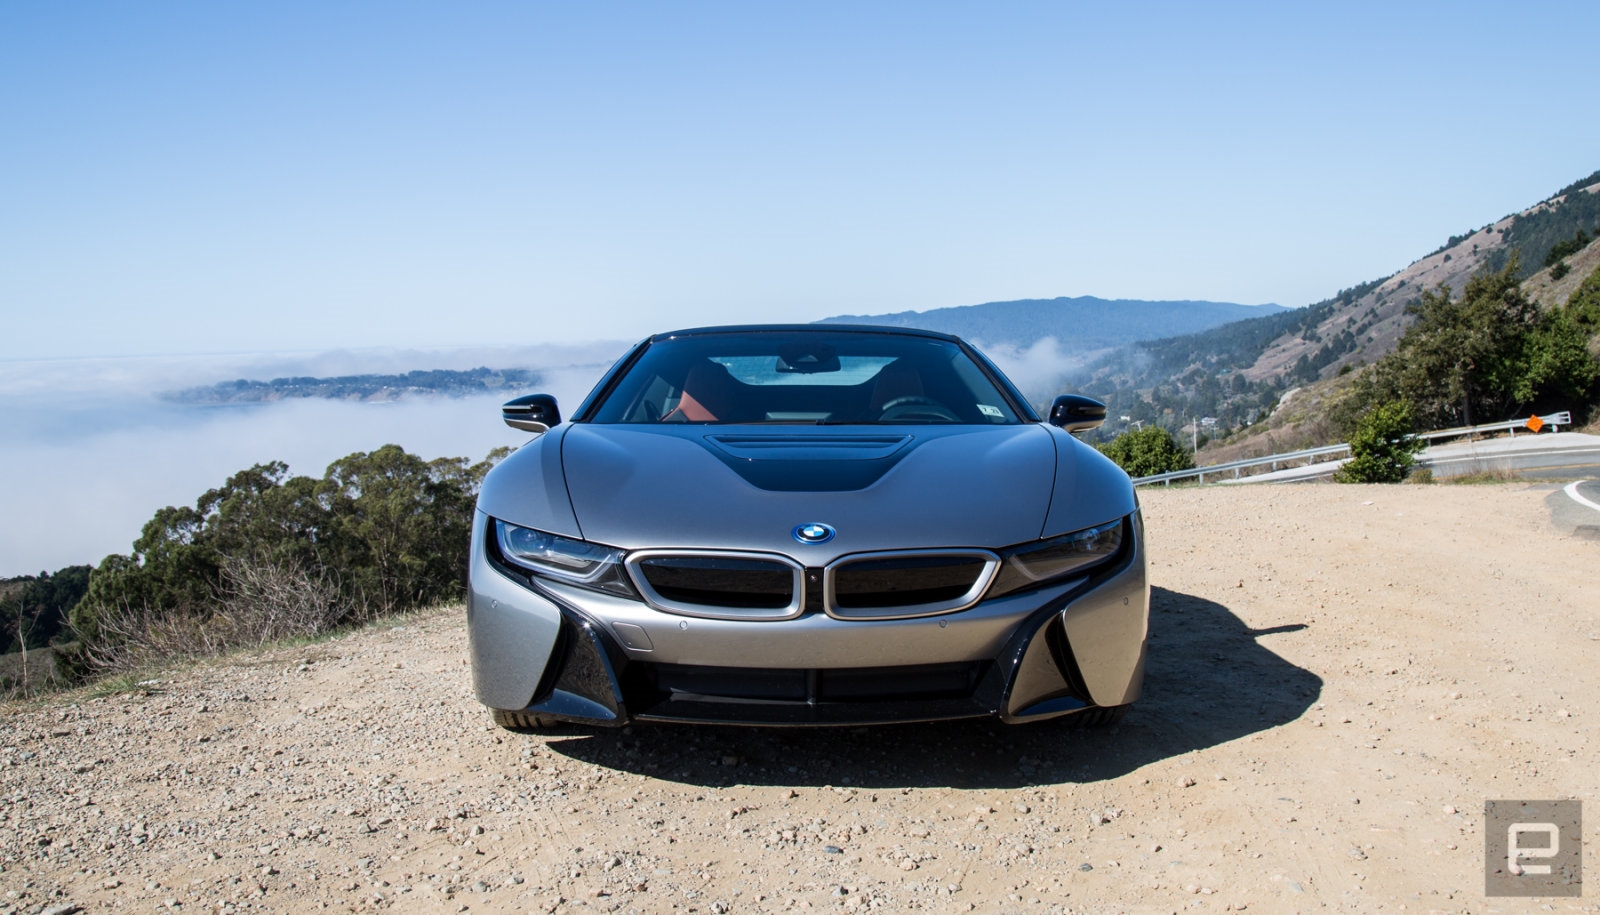 BMW’s i8 Roadster is a daily driver in supercar’s clothing | DeviceDaily.com